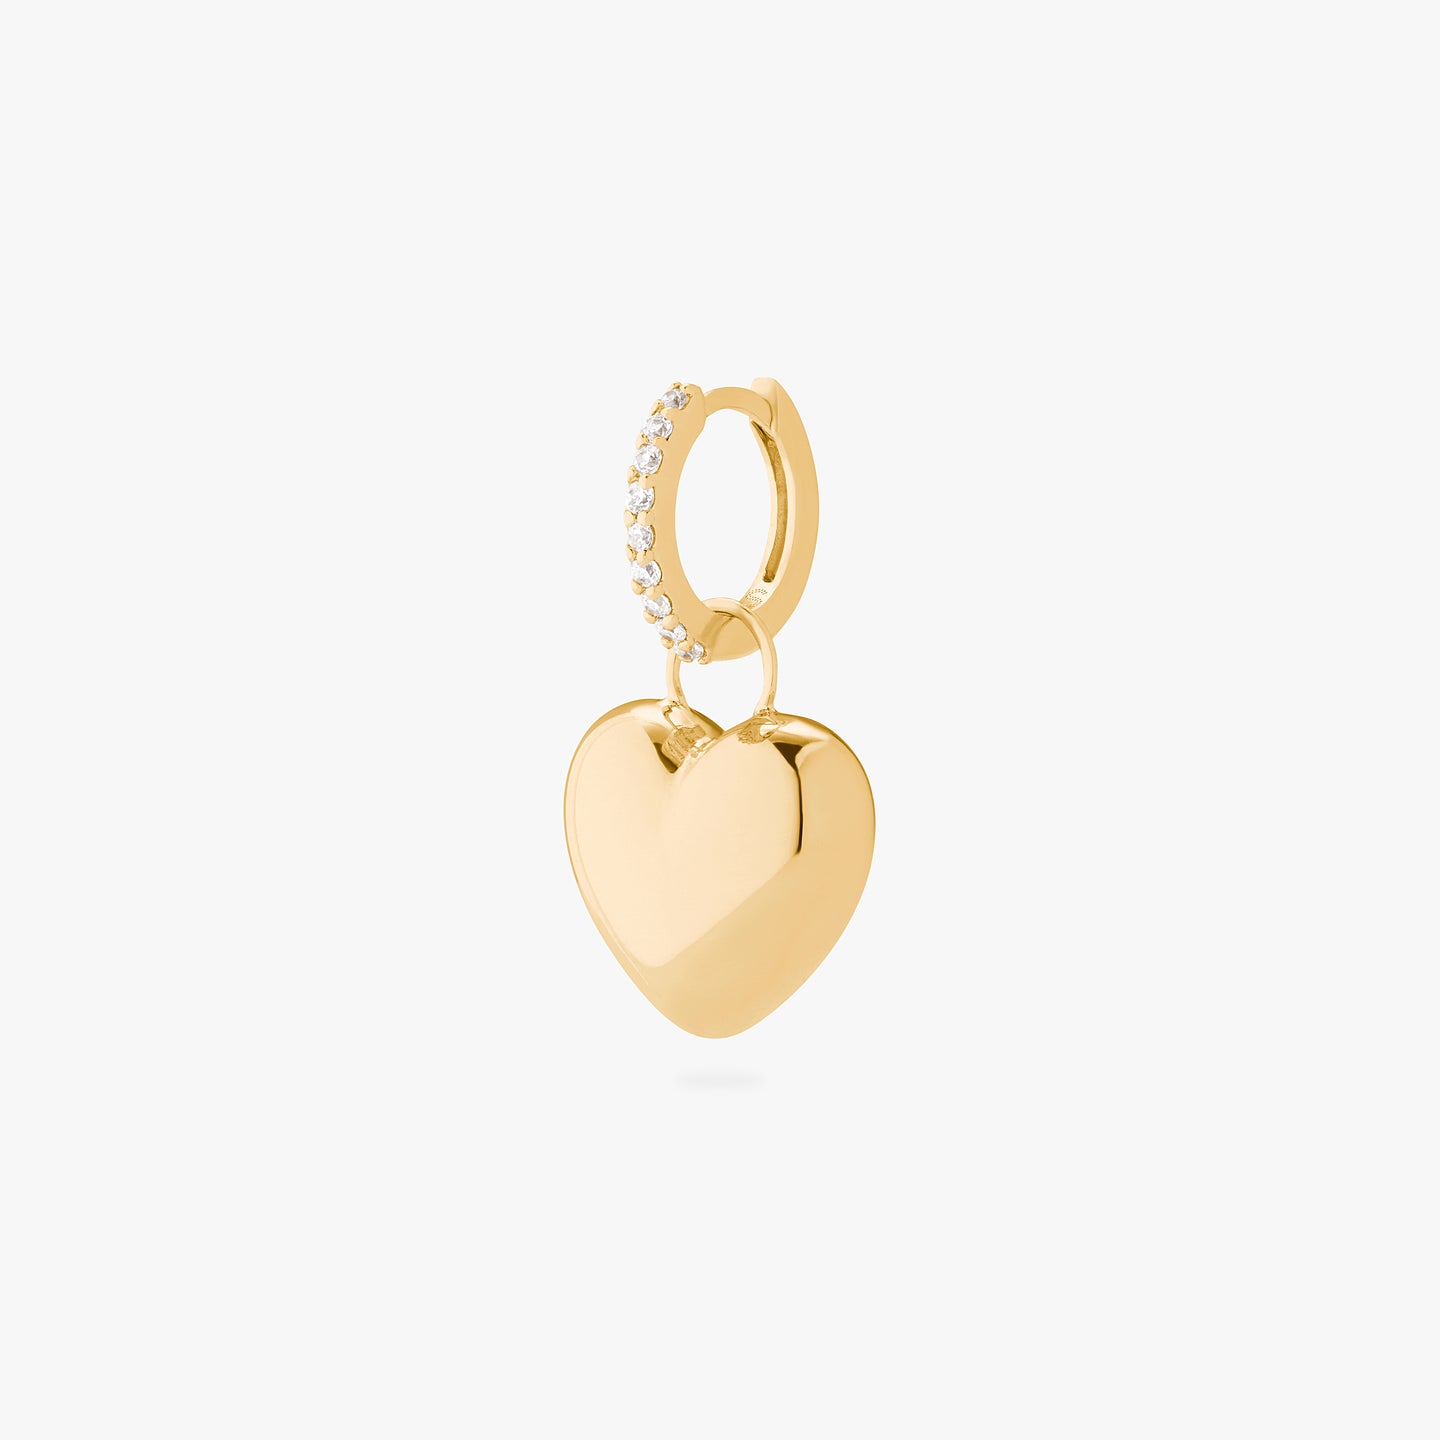 An image of a gold/clear mini pave huggie with a gold, puffy heart shaped charm. color:null|gold/clear